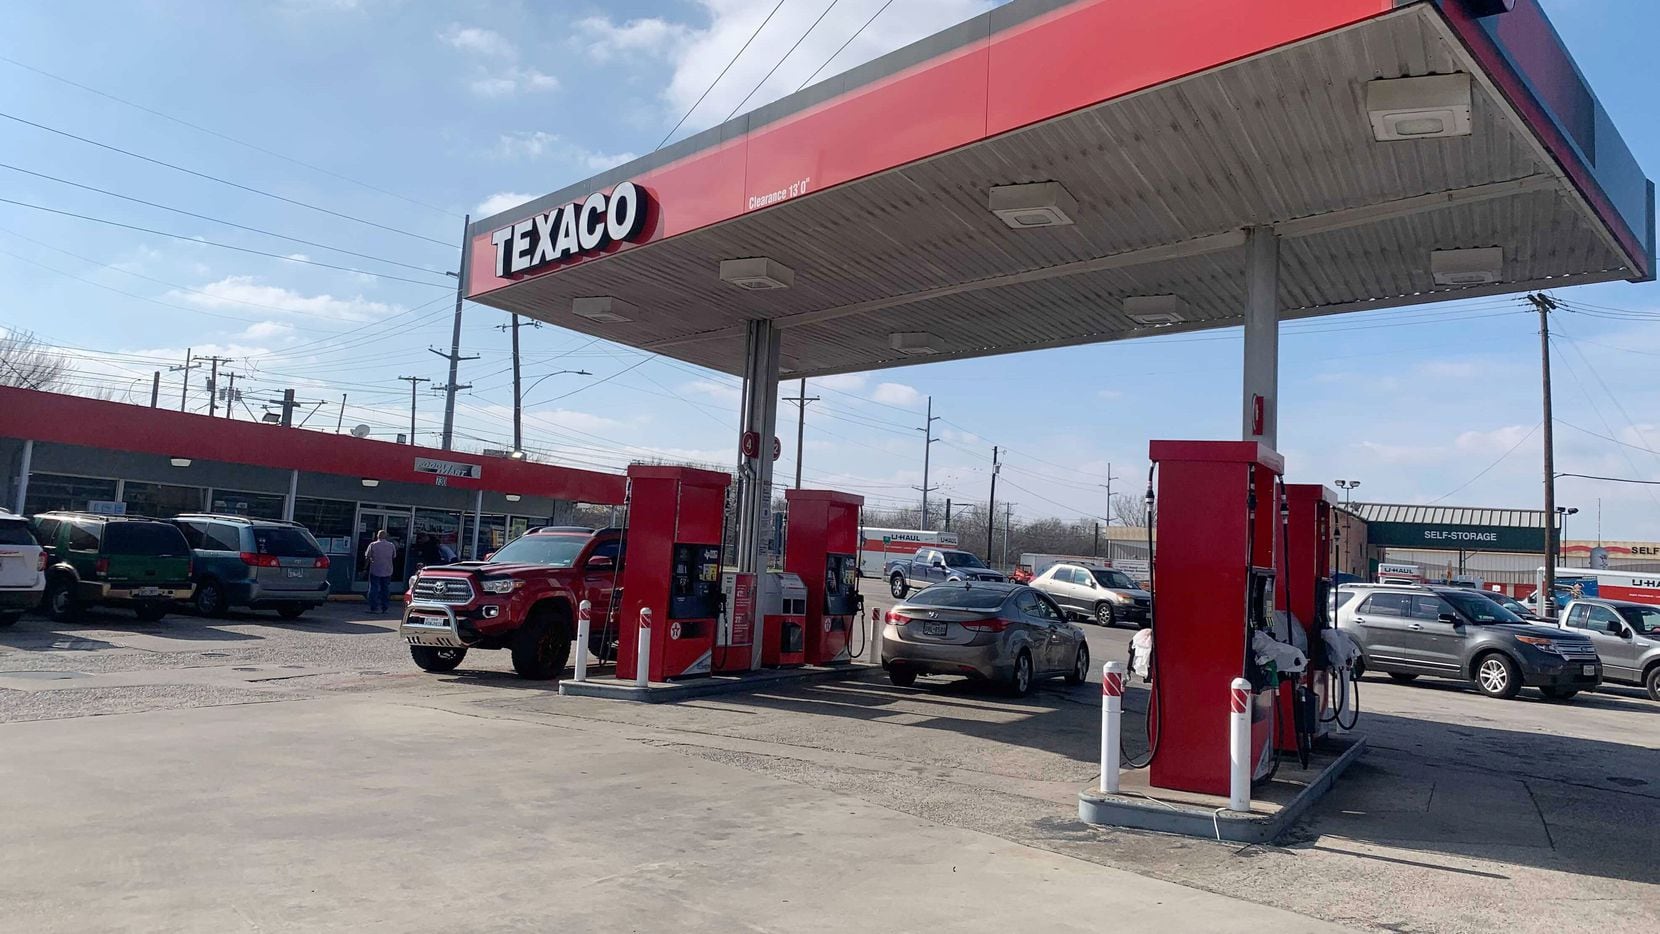 The Texaco station where three men were dead after a shooting inside the gas station in...